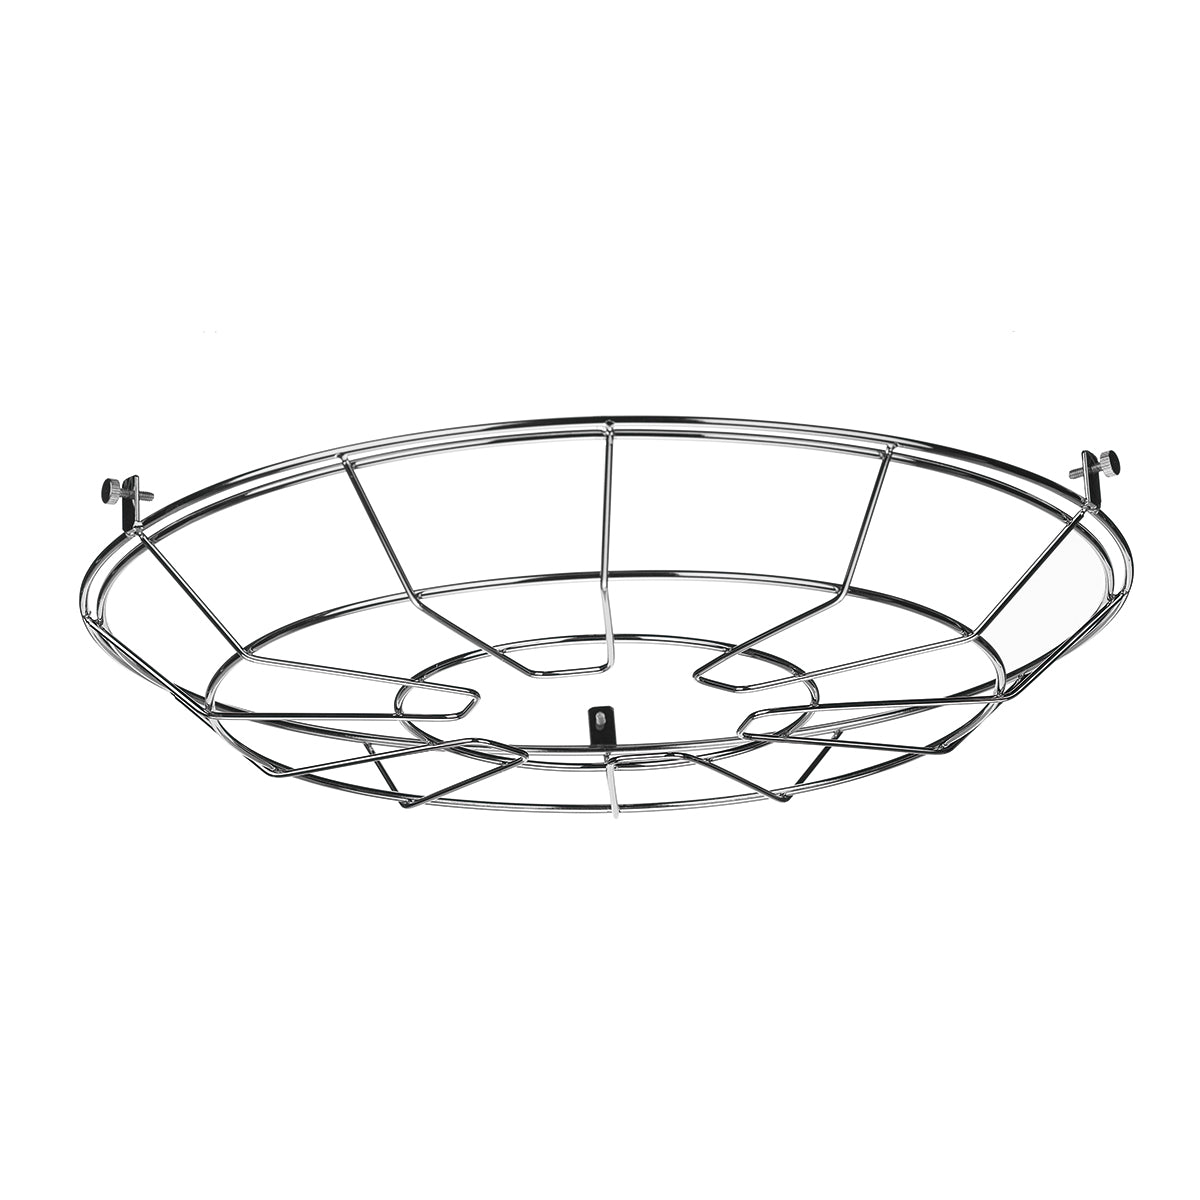 David Hunt Lighting Reclamation or Metro fitting Cage Frame